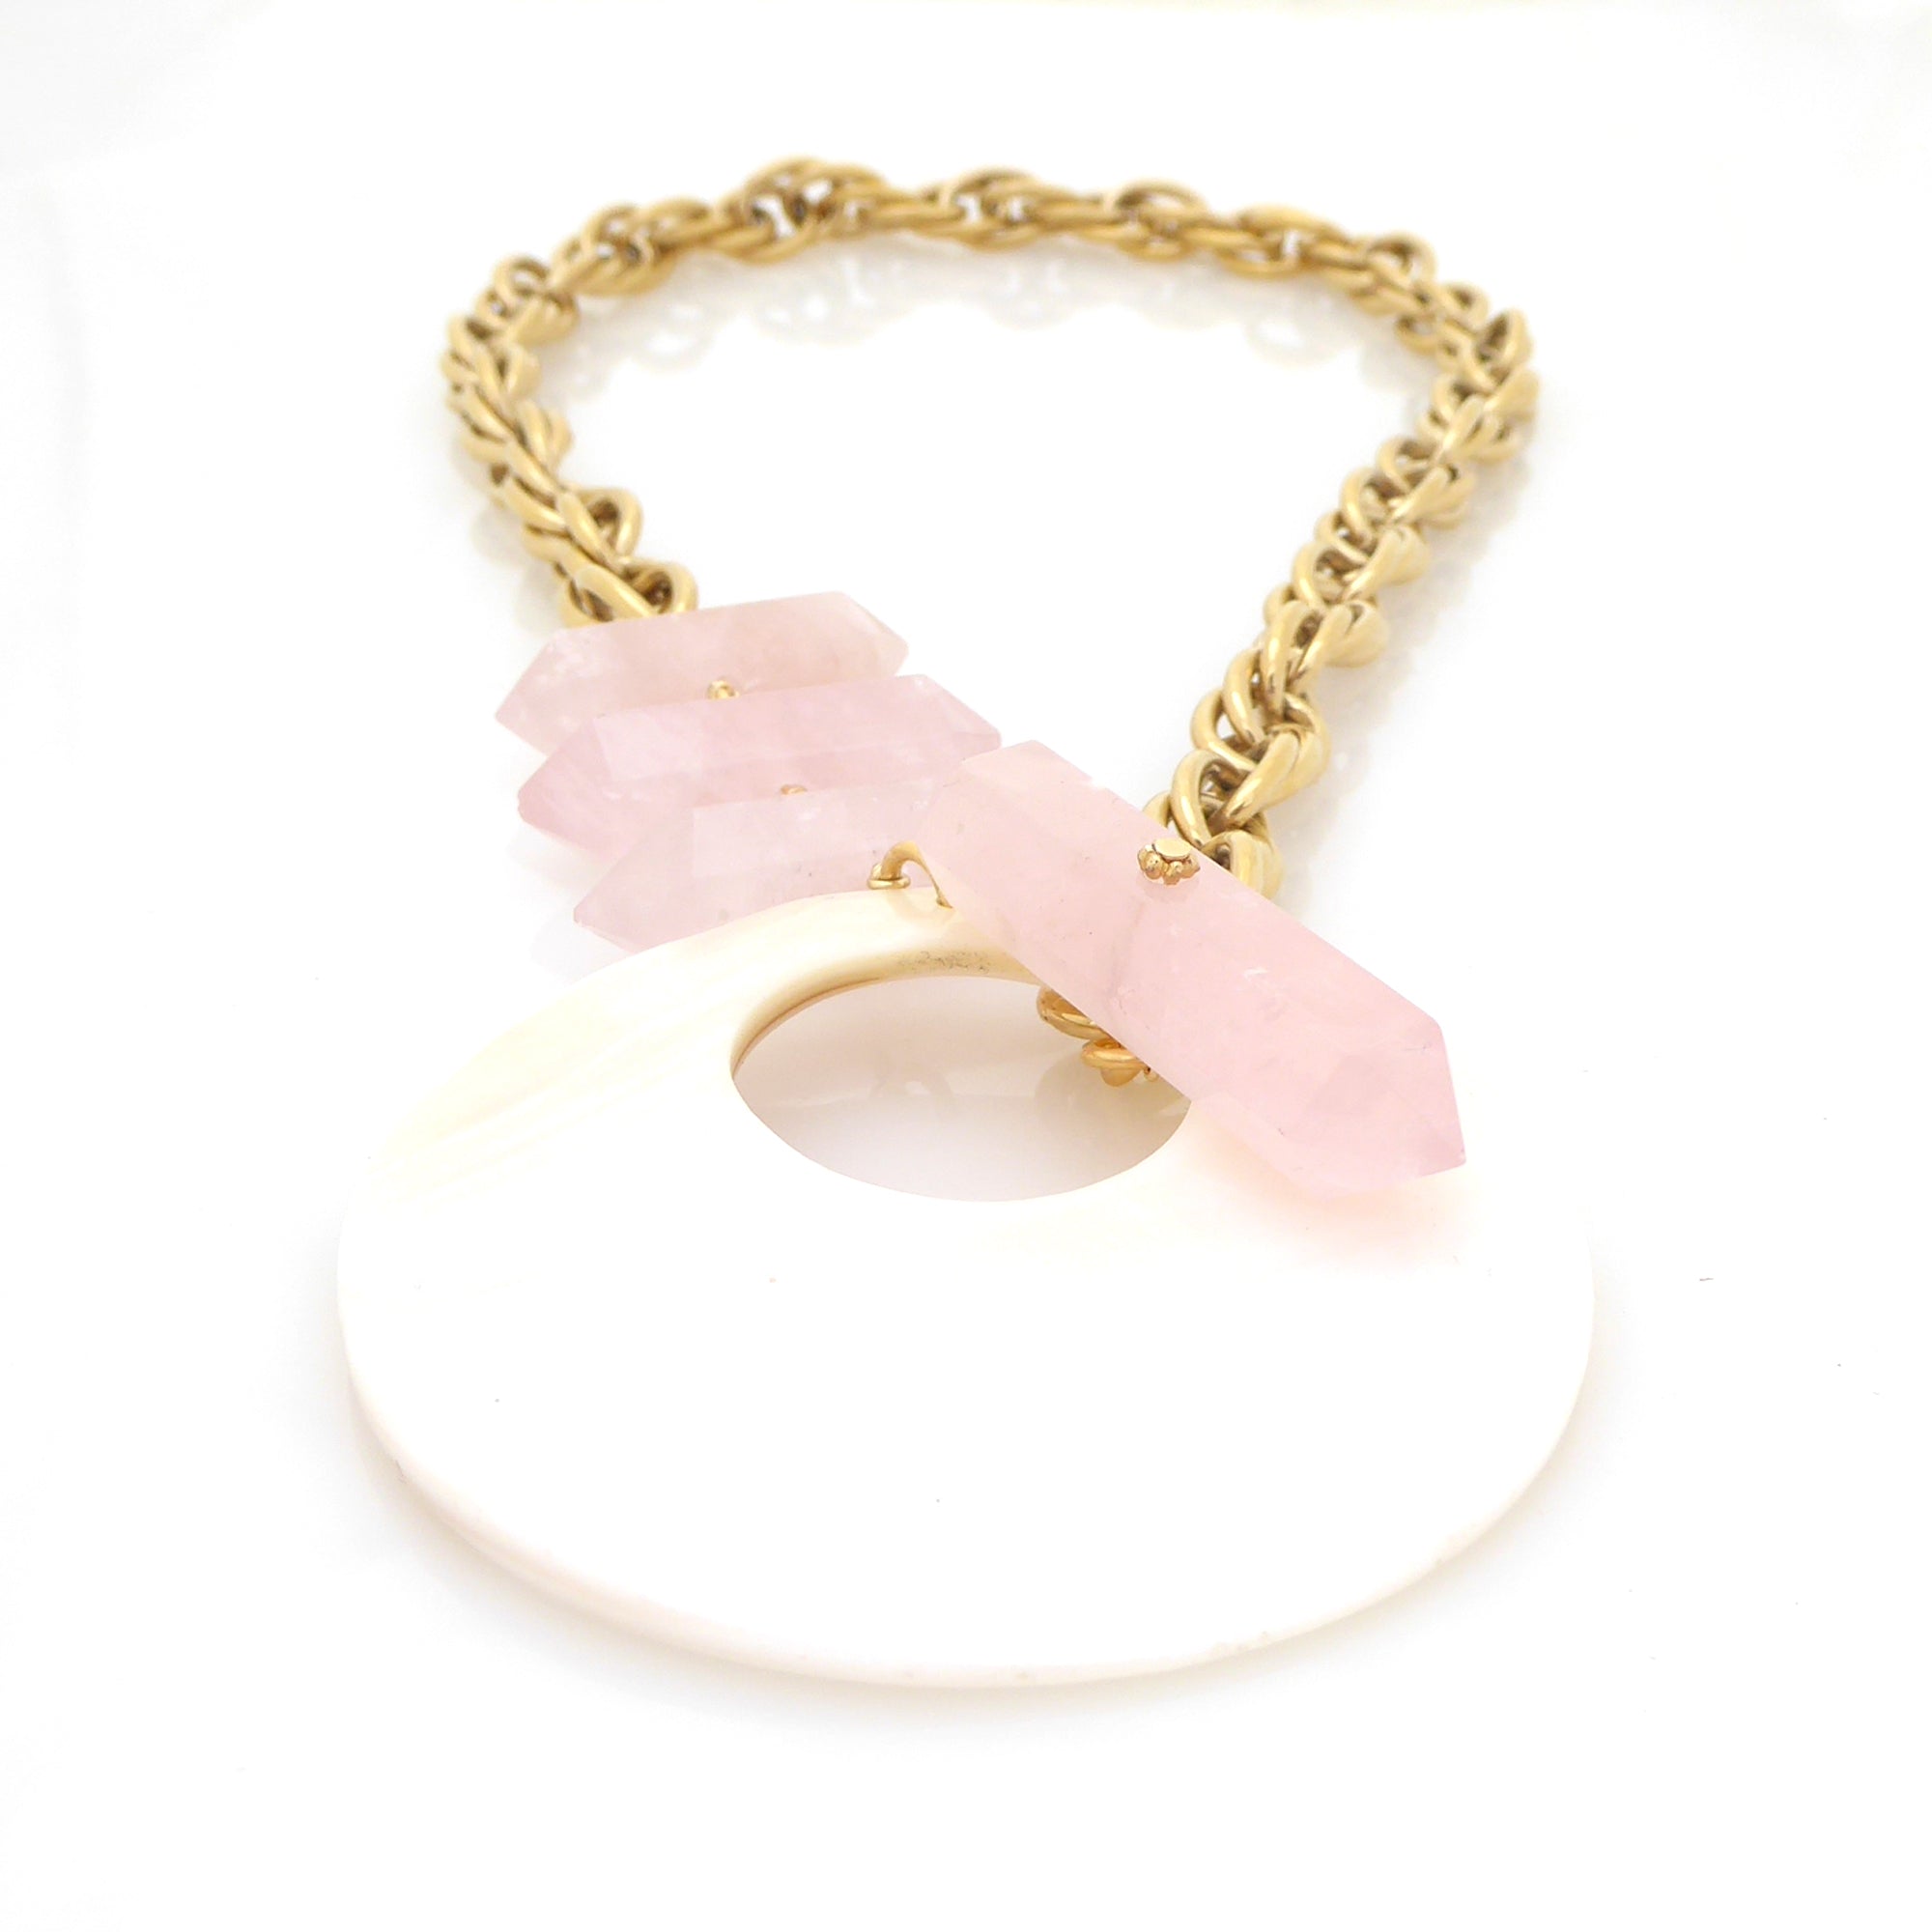 Marna rose quartz and shell necklace by Jenny Dayco 3